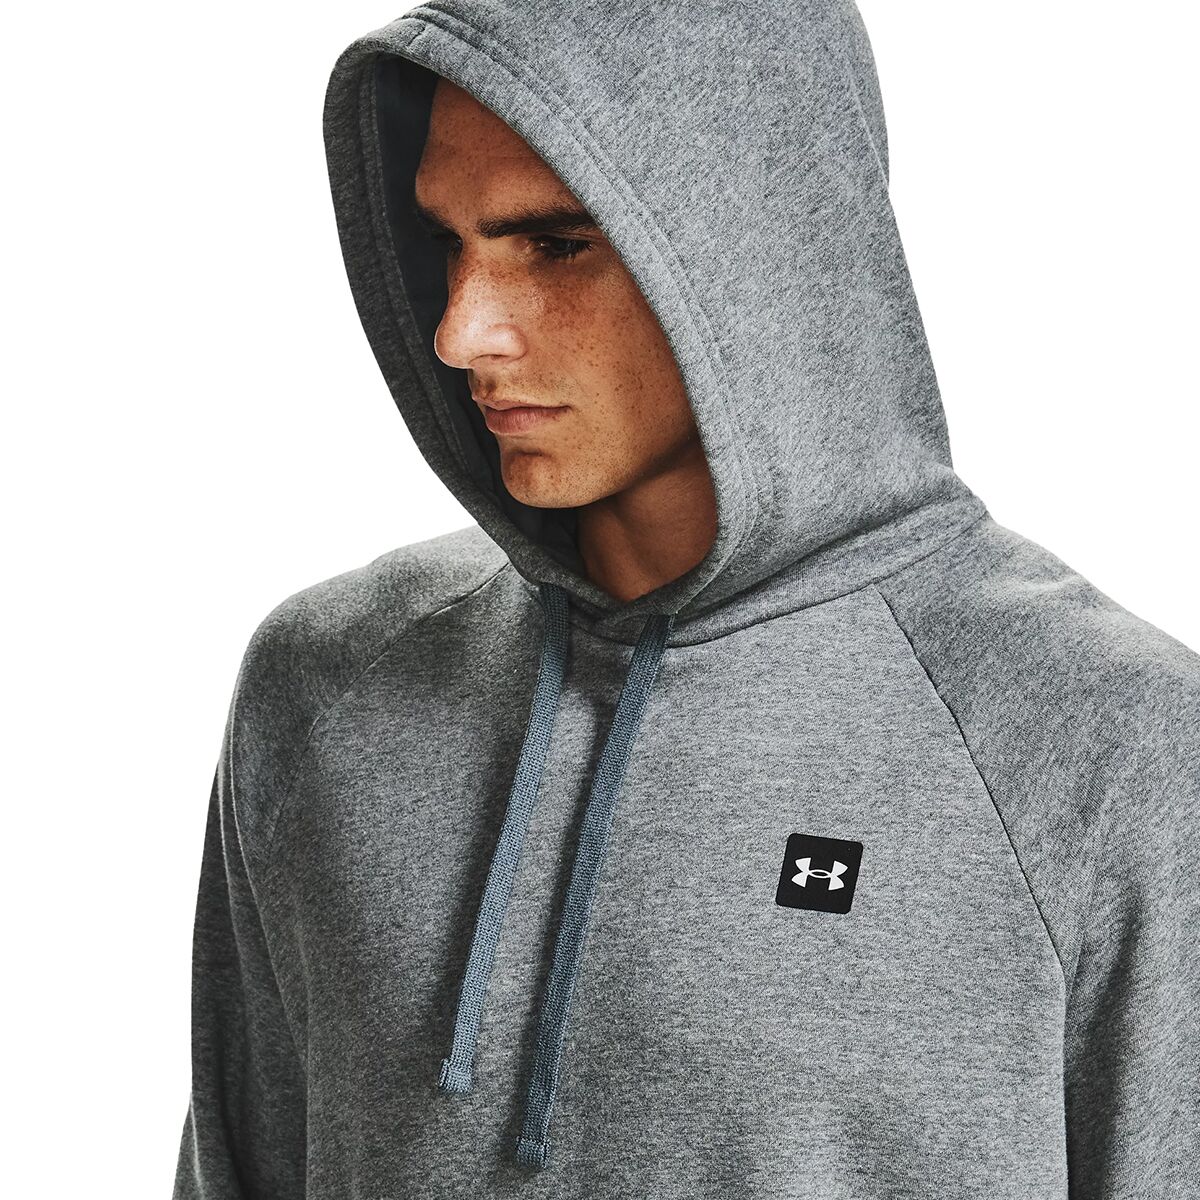 Under Armour Rival Fleece Hoodie - - Clothing